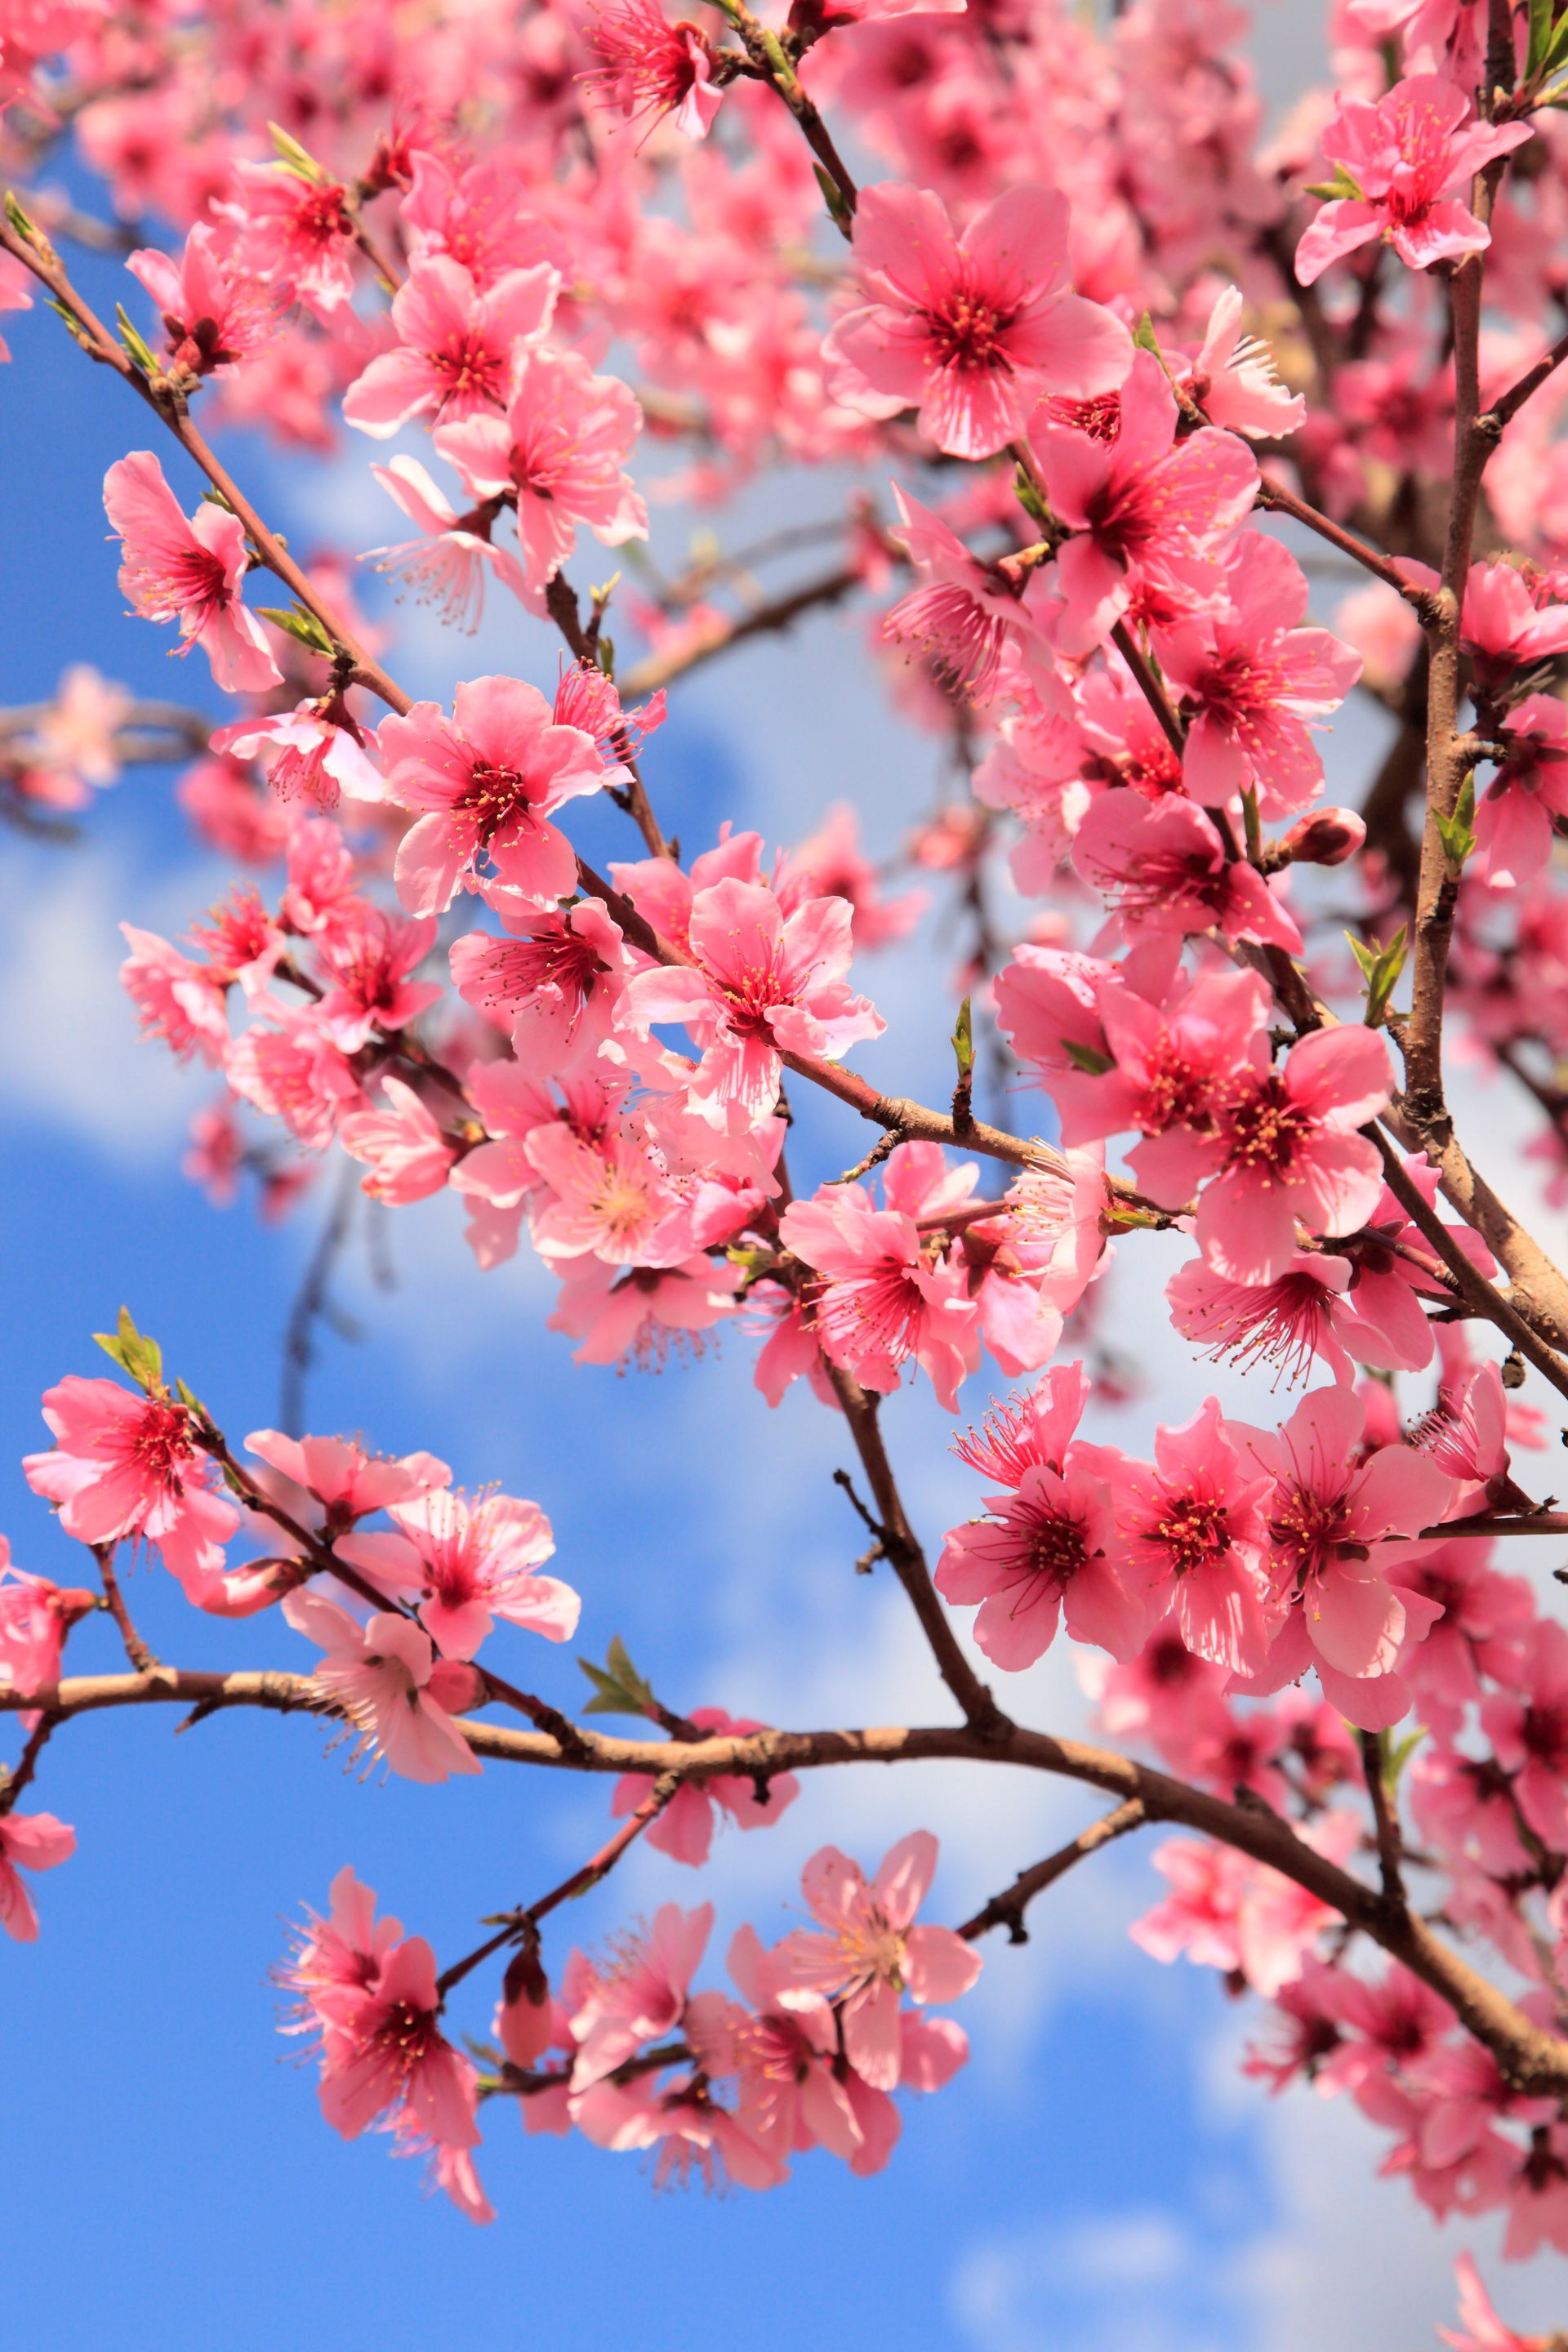 Pink blossoms on a peach tree in spring.